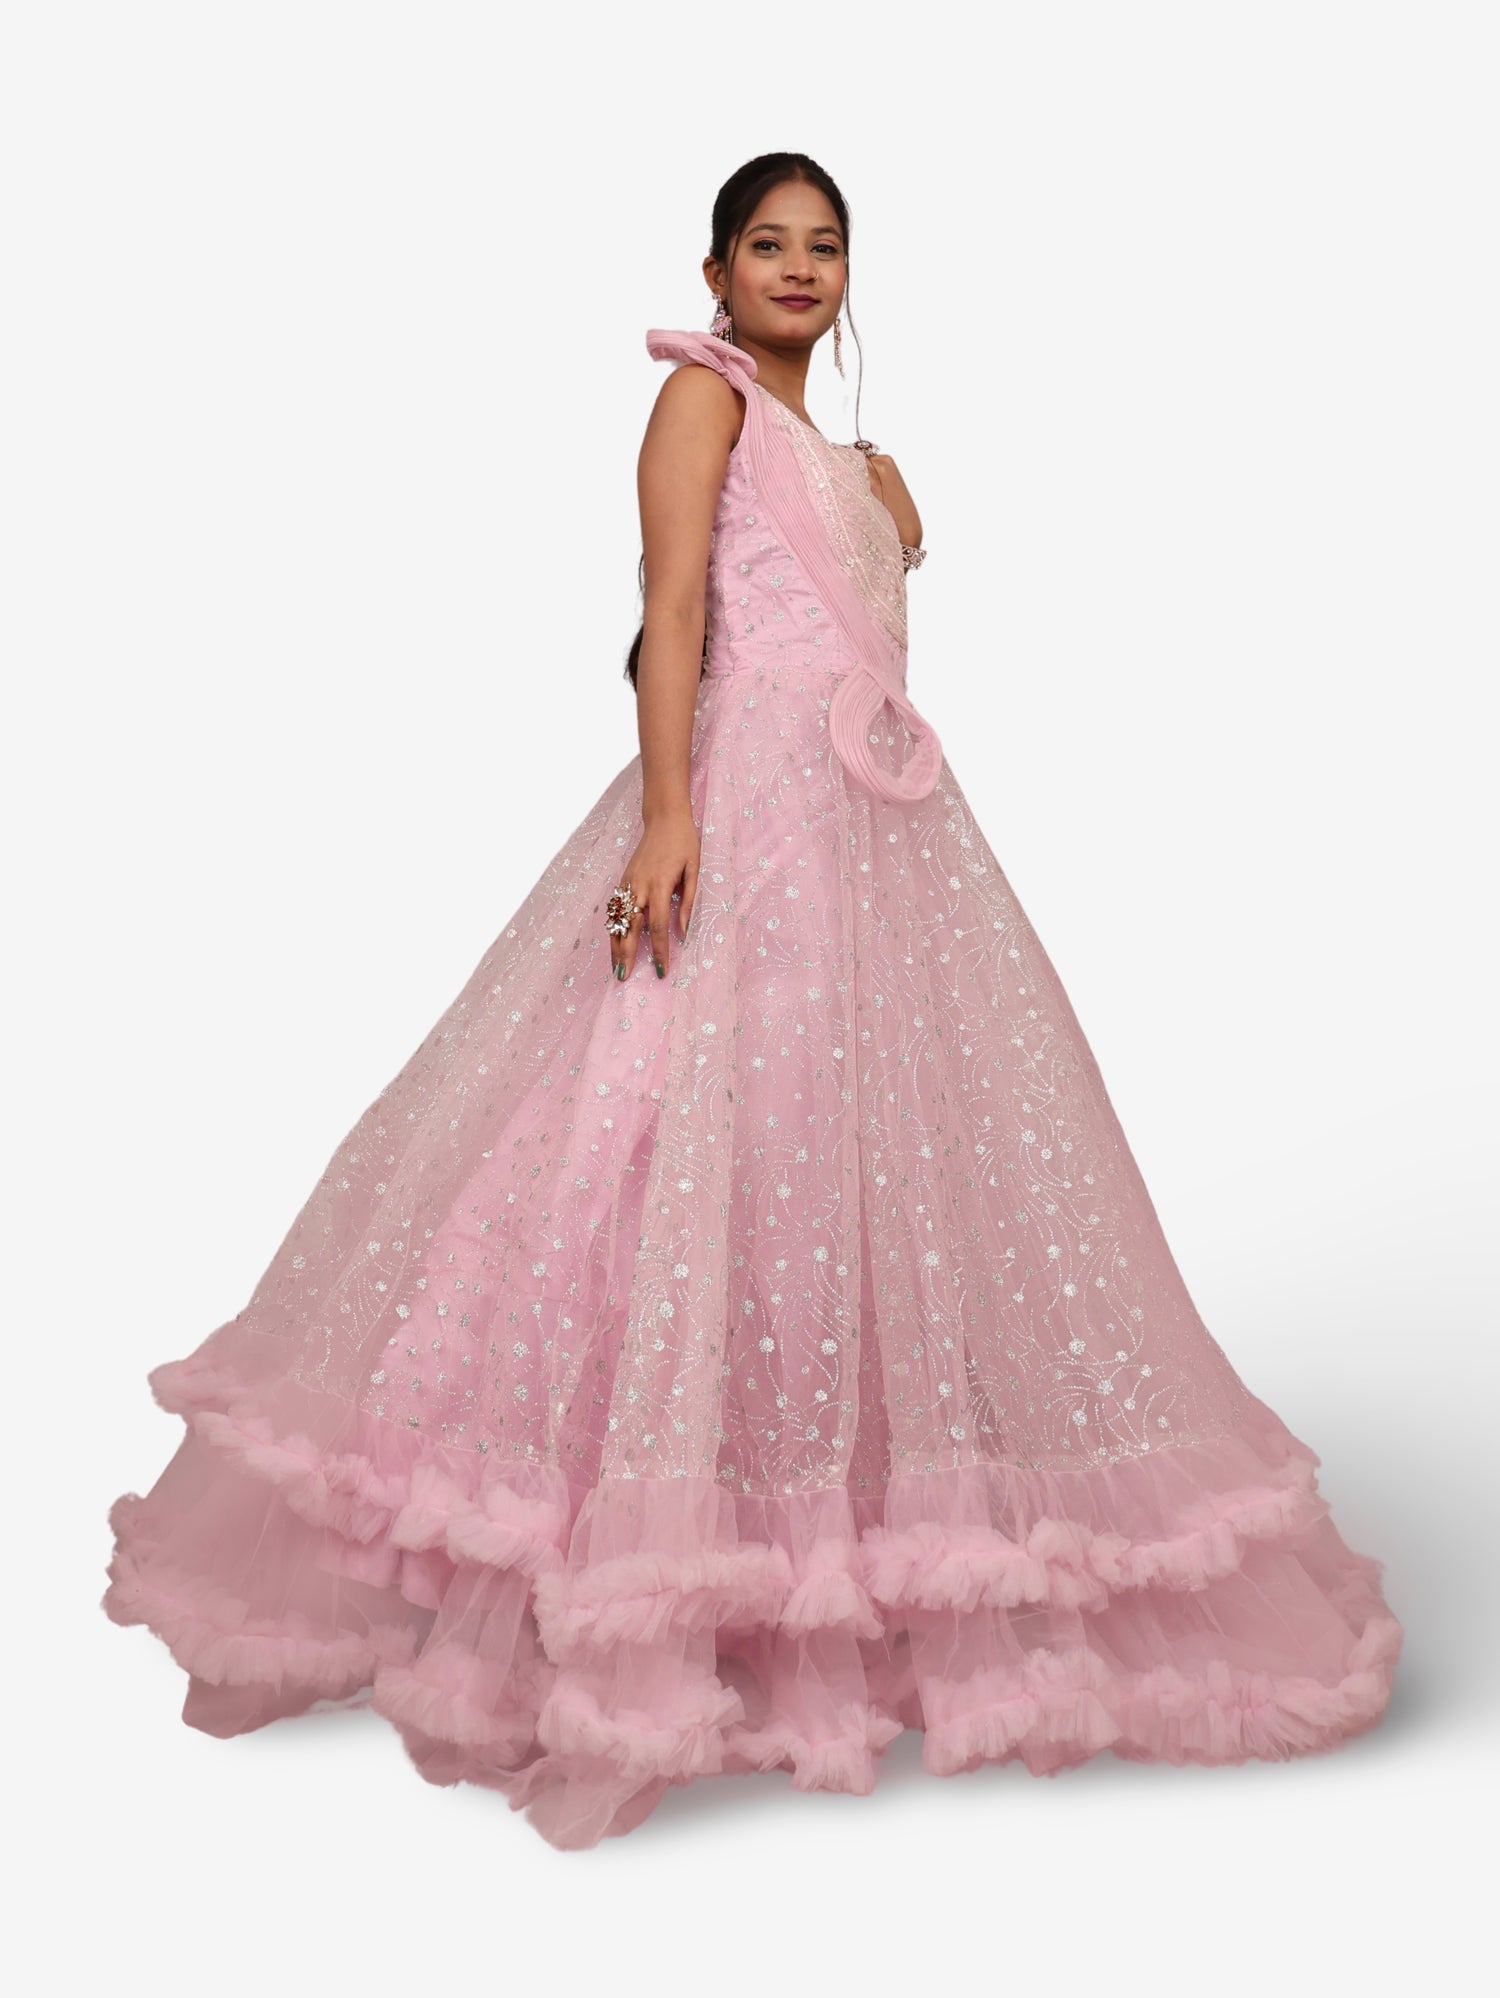 Gown with Cut Dana &amp; Glitter Work by Shreekama Pink Designer Gowns for Party Festival Wedding Occasion in Noida